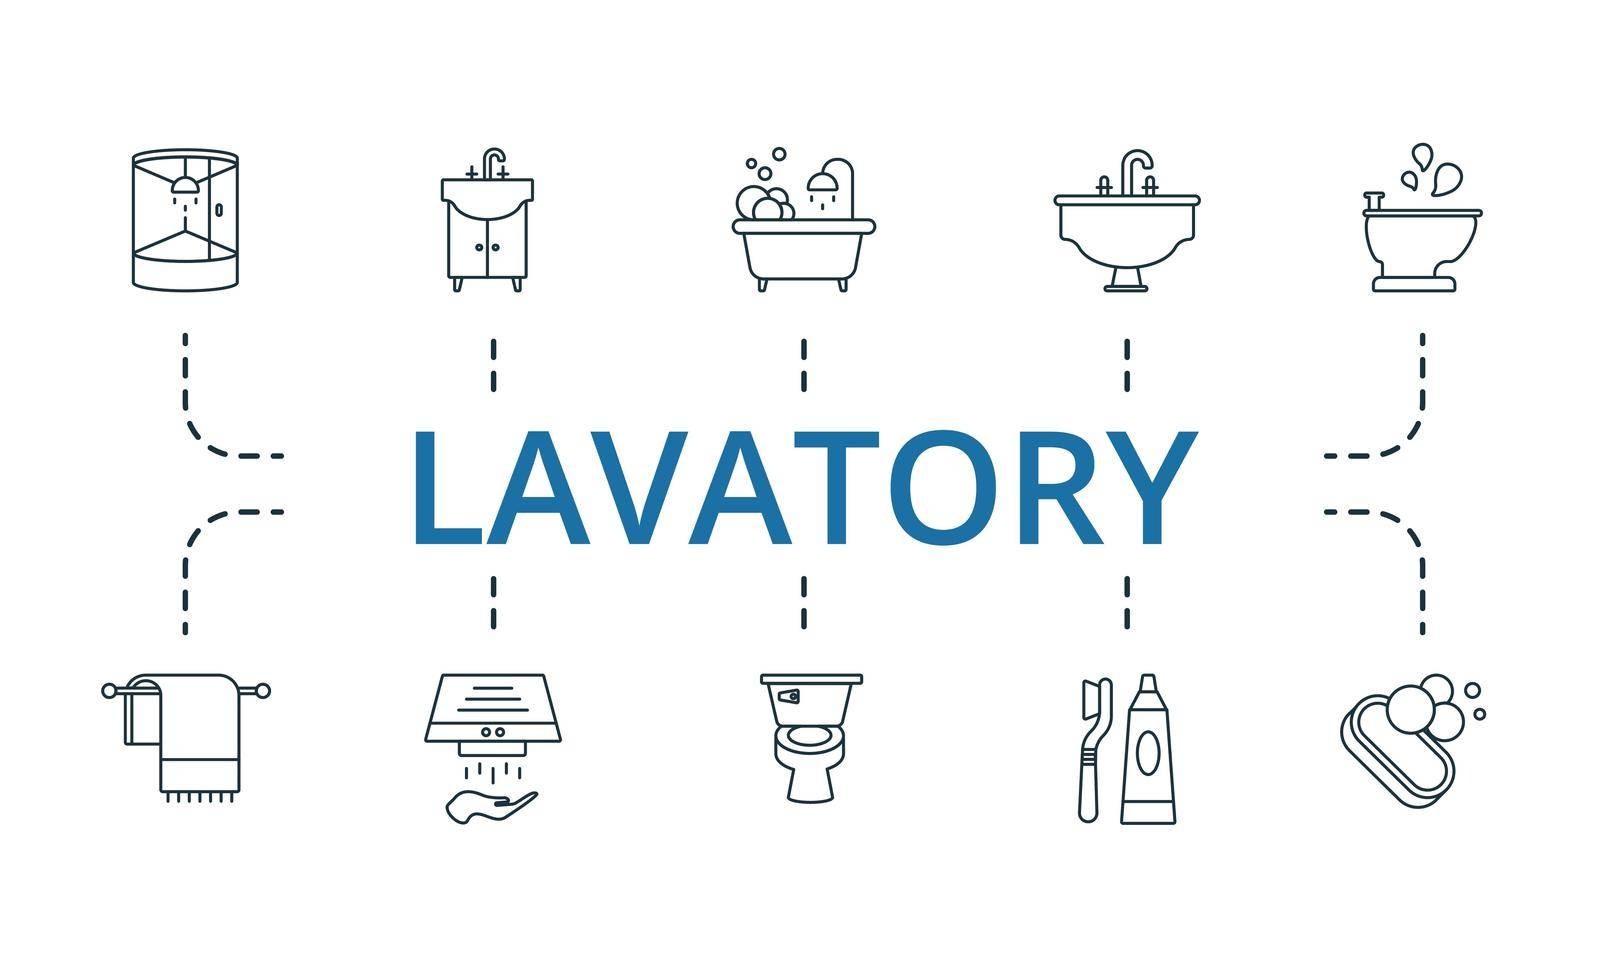 Lavatory set icon. Editable icons lavatory theme such as deposits acceptance, funds remittance, bill payment services and more